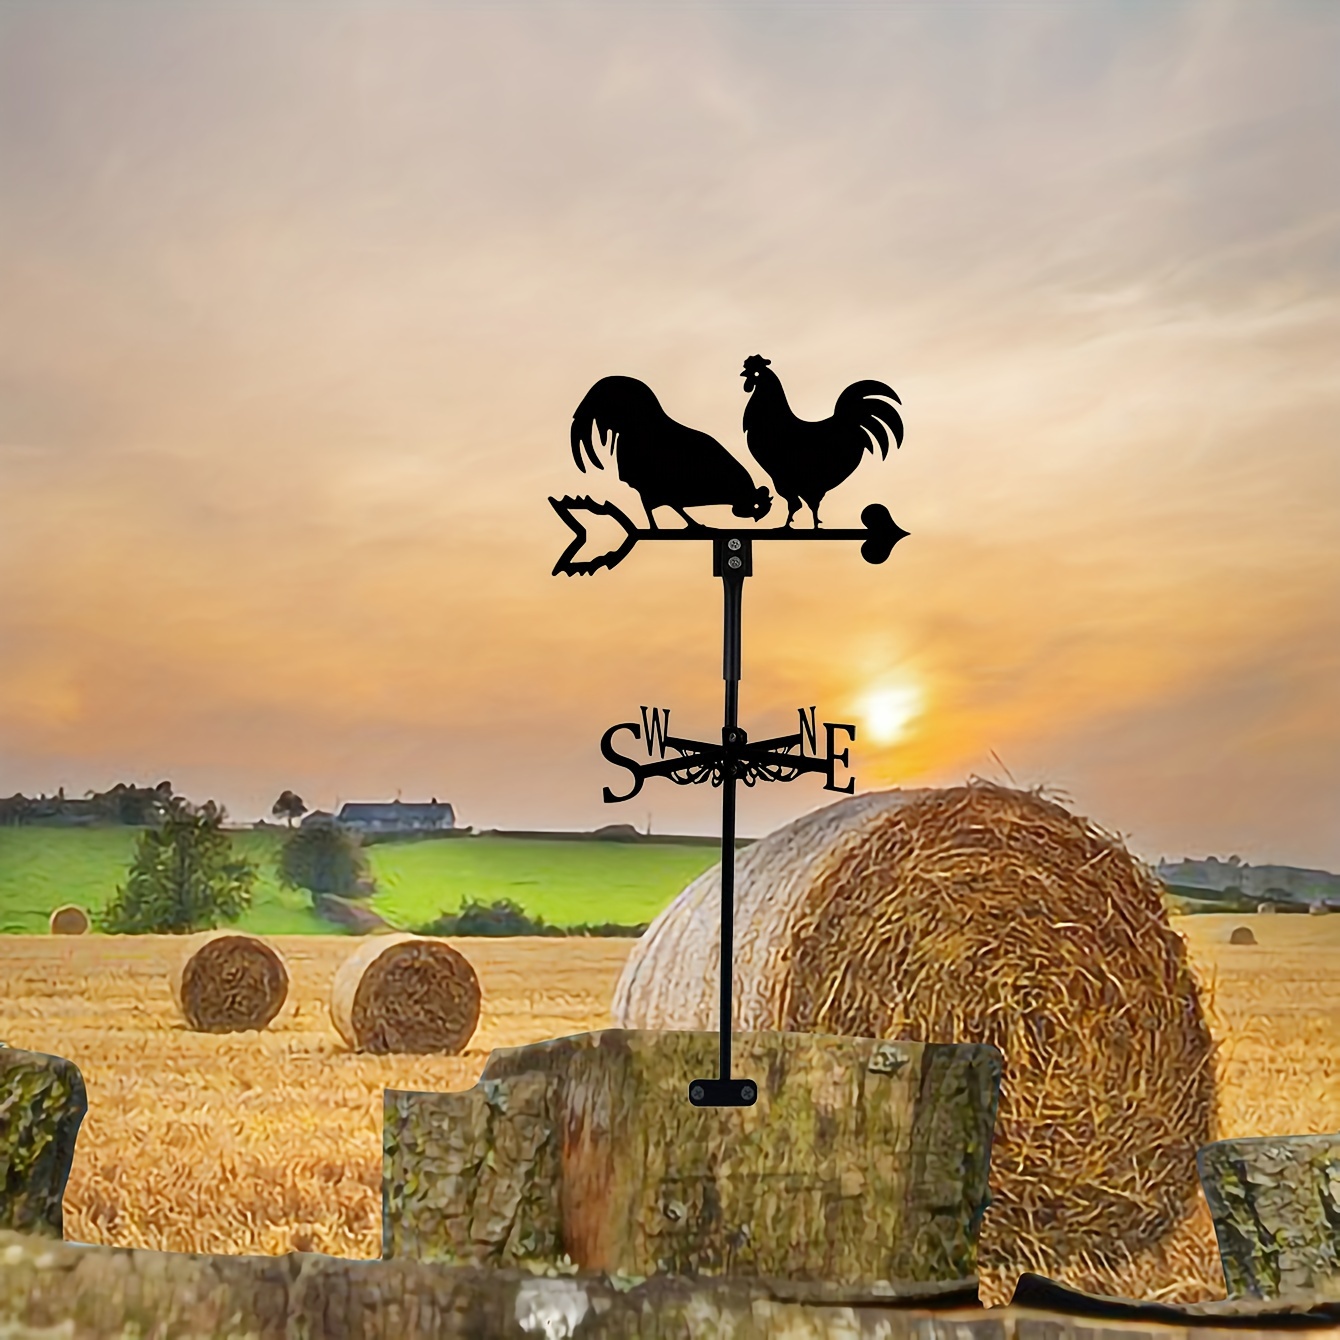 

1pc Funny Rooster Weather Vane, Metal Silhouette Wind Direction Indicator, Roof Fence Mount, Yard, Farm, Lawn, Outdoor